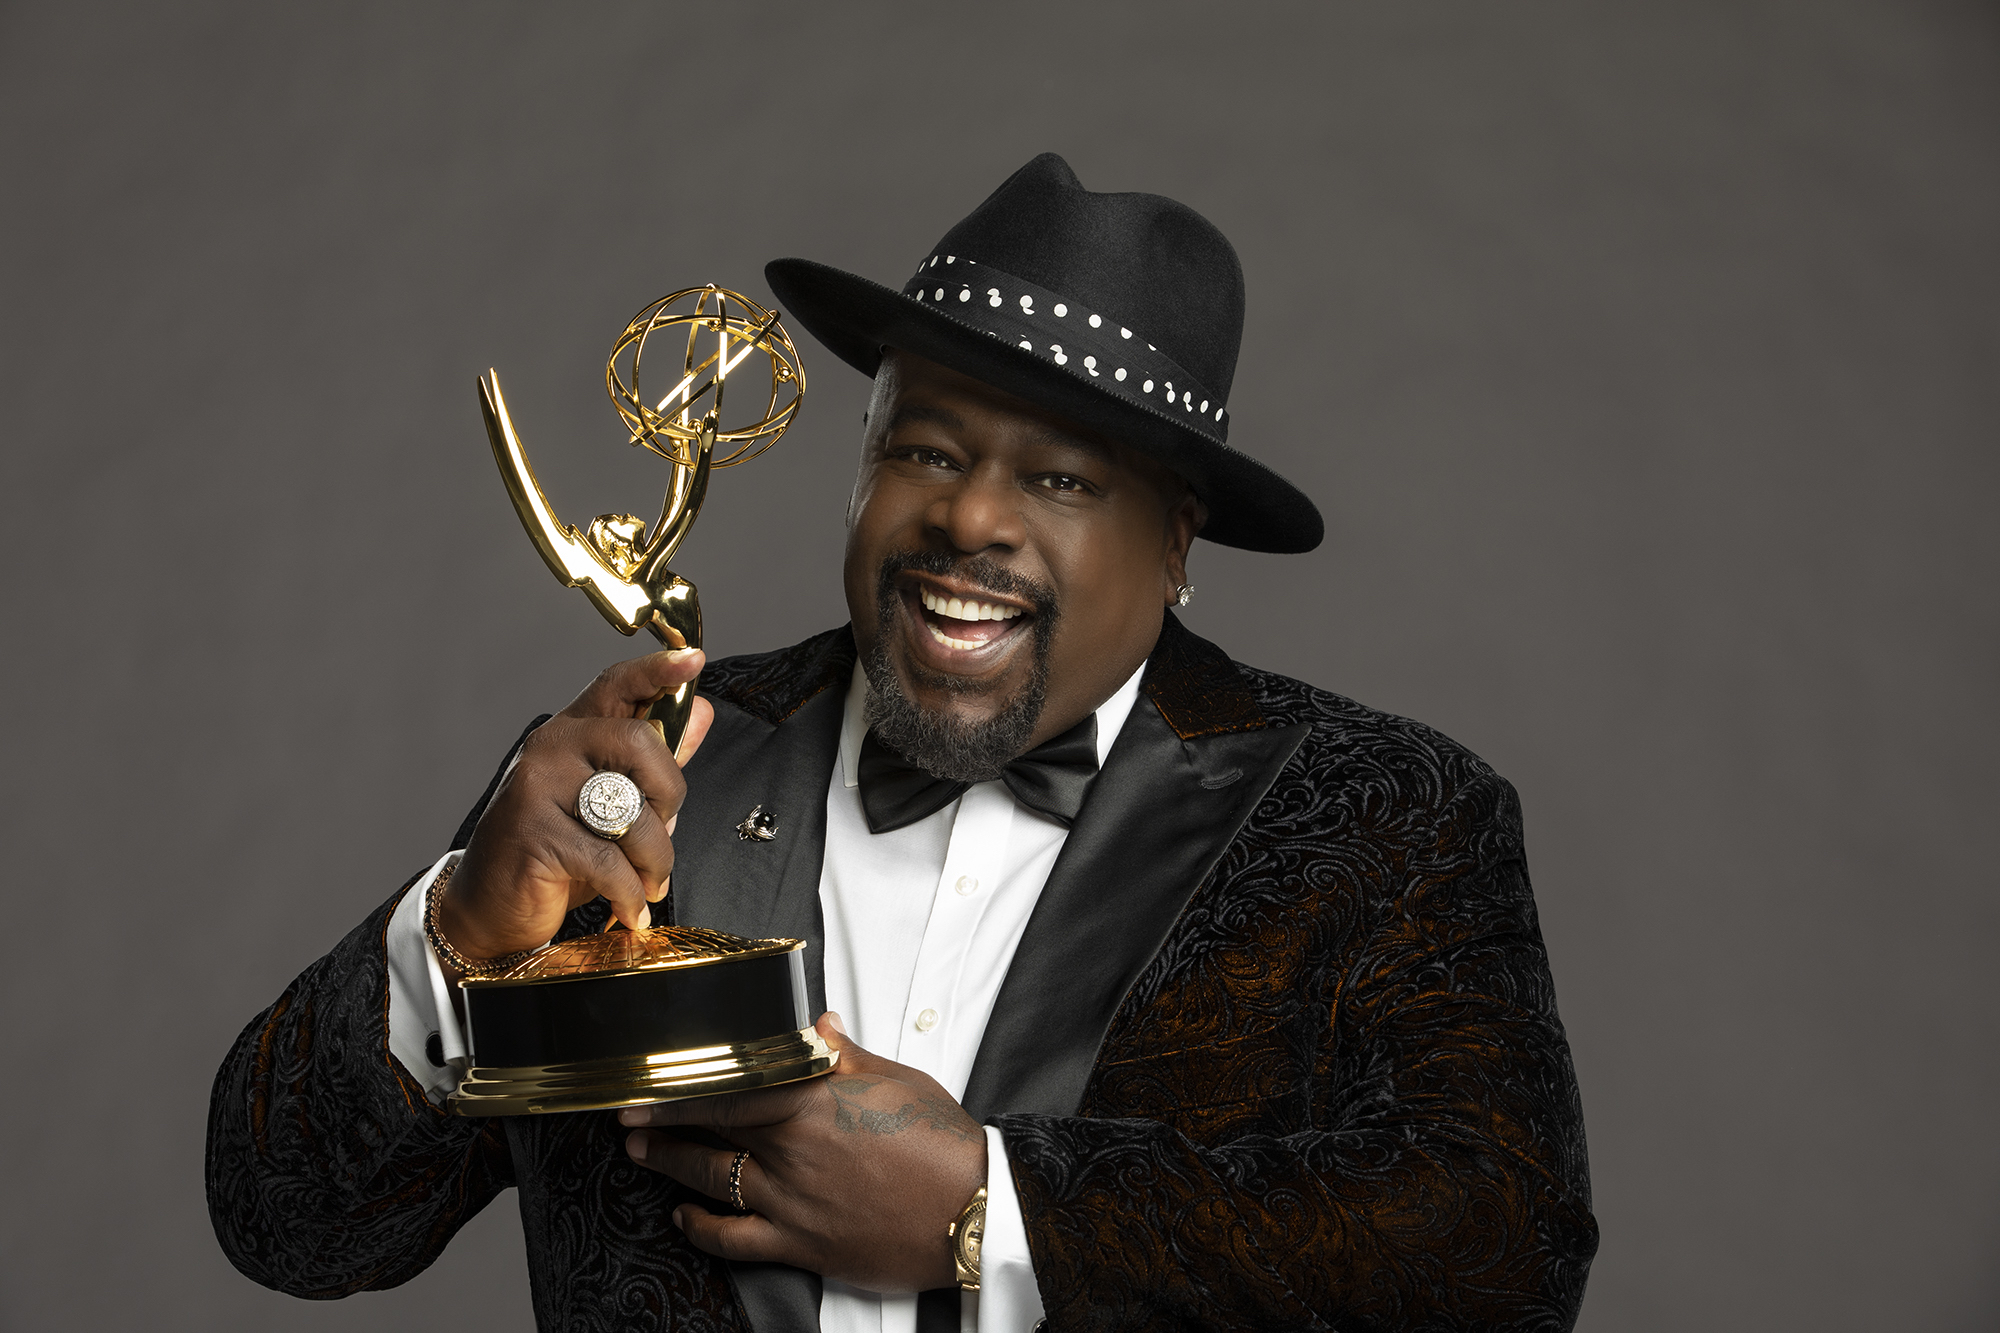 Cedric the Entertainer, the host of the 73rd Primetime Emmy Awards in 2021, smiling and holding an Emmy in his hands